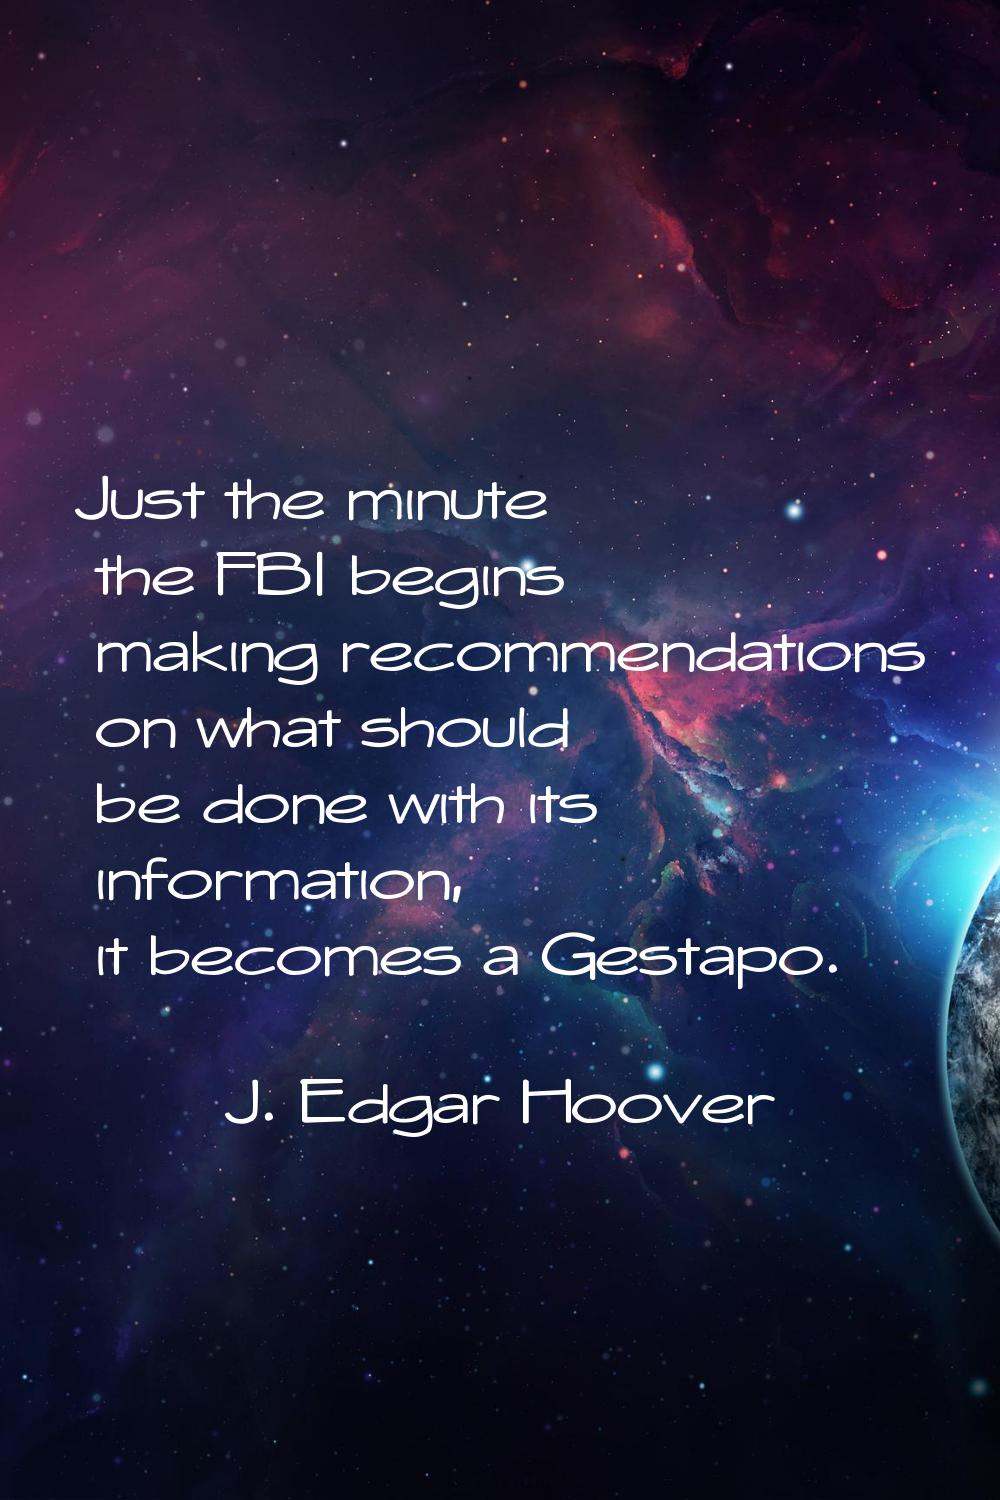 Just the minute the FBI begins making recommendations on what should be done with its information, 